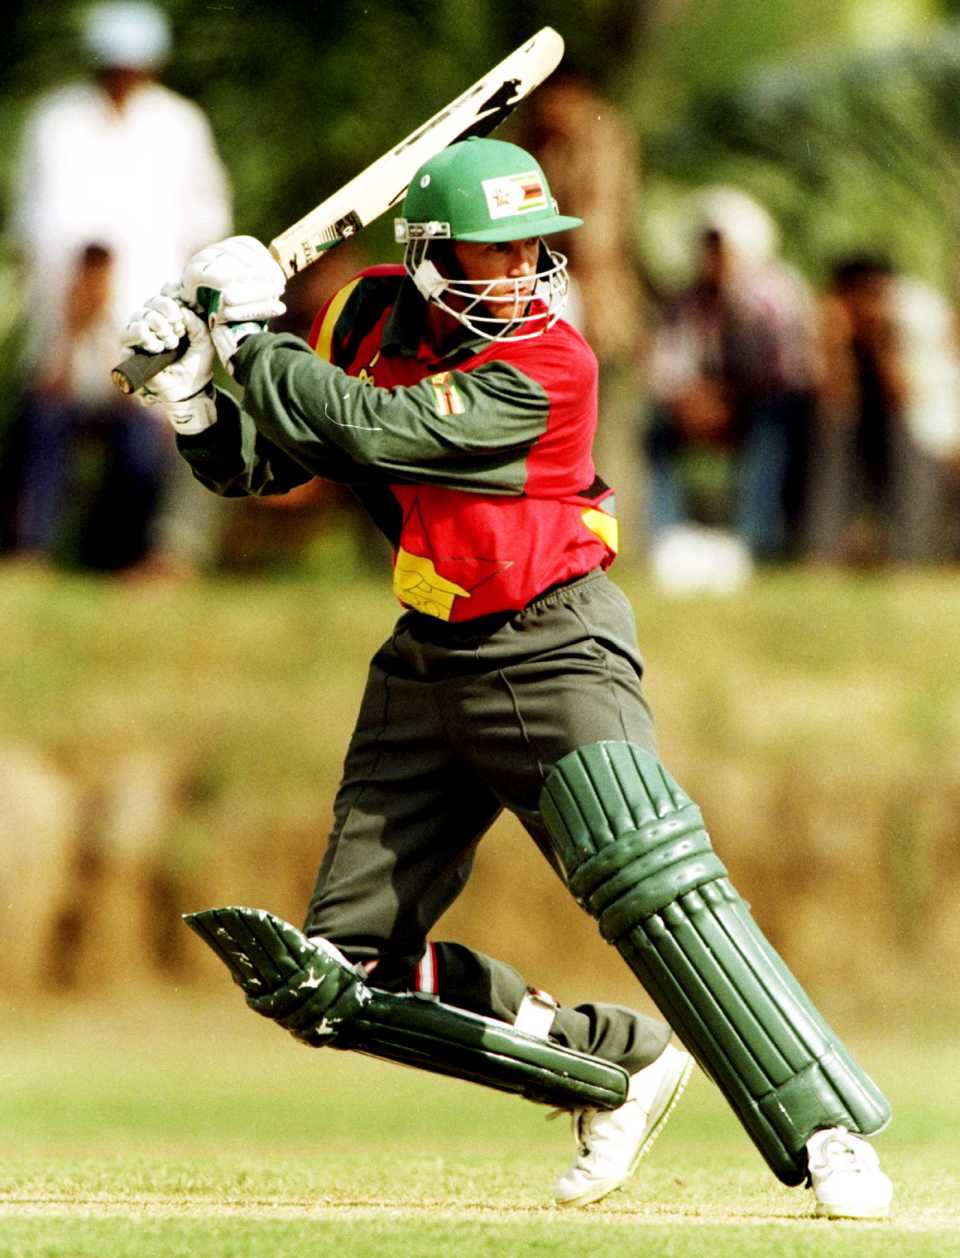 Andy Flower cuts on his way to 77, New Zealand v Zimbabwe, Preliminary quarter-final, Wills International Cup, Dhaka, October 24, 1998